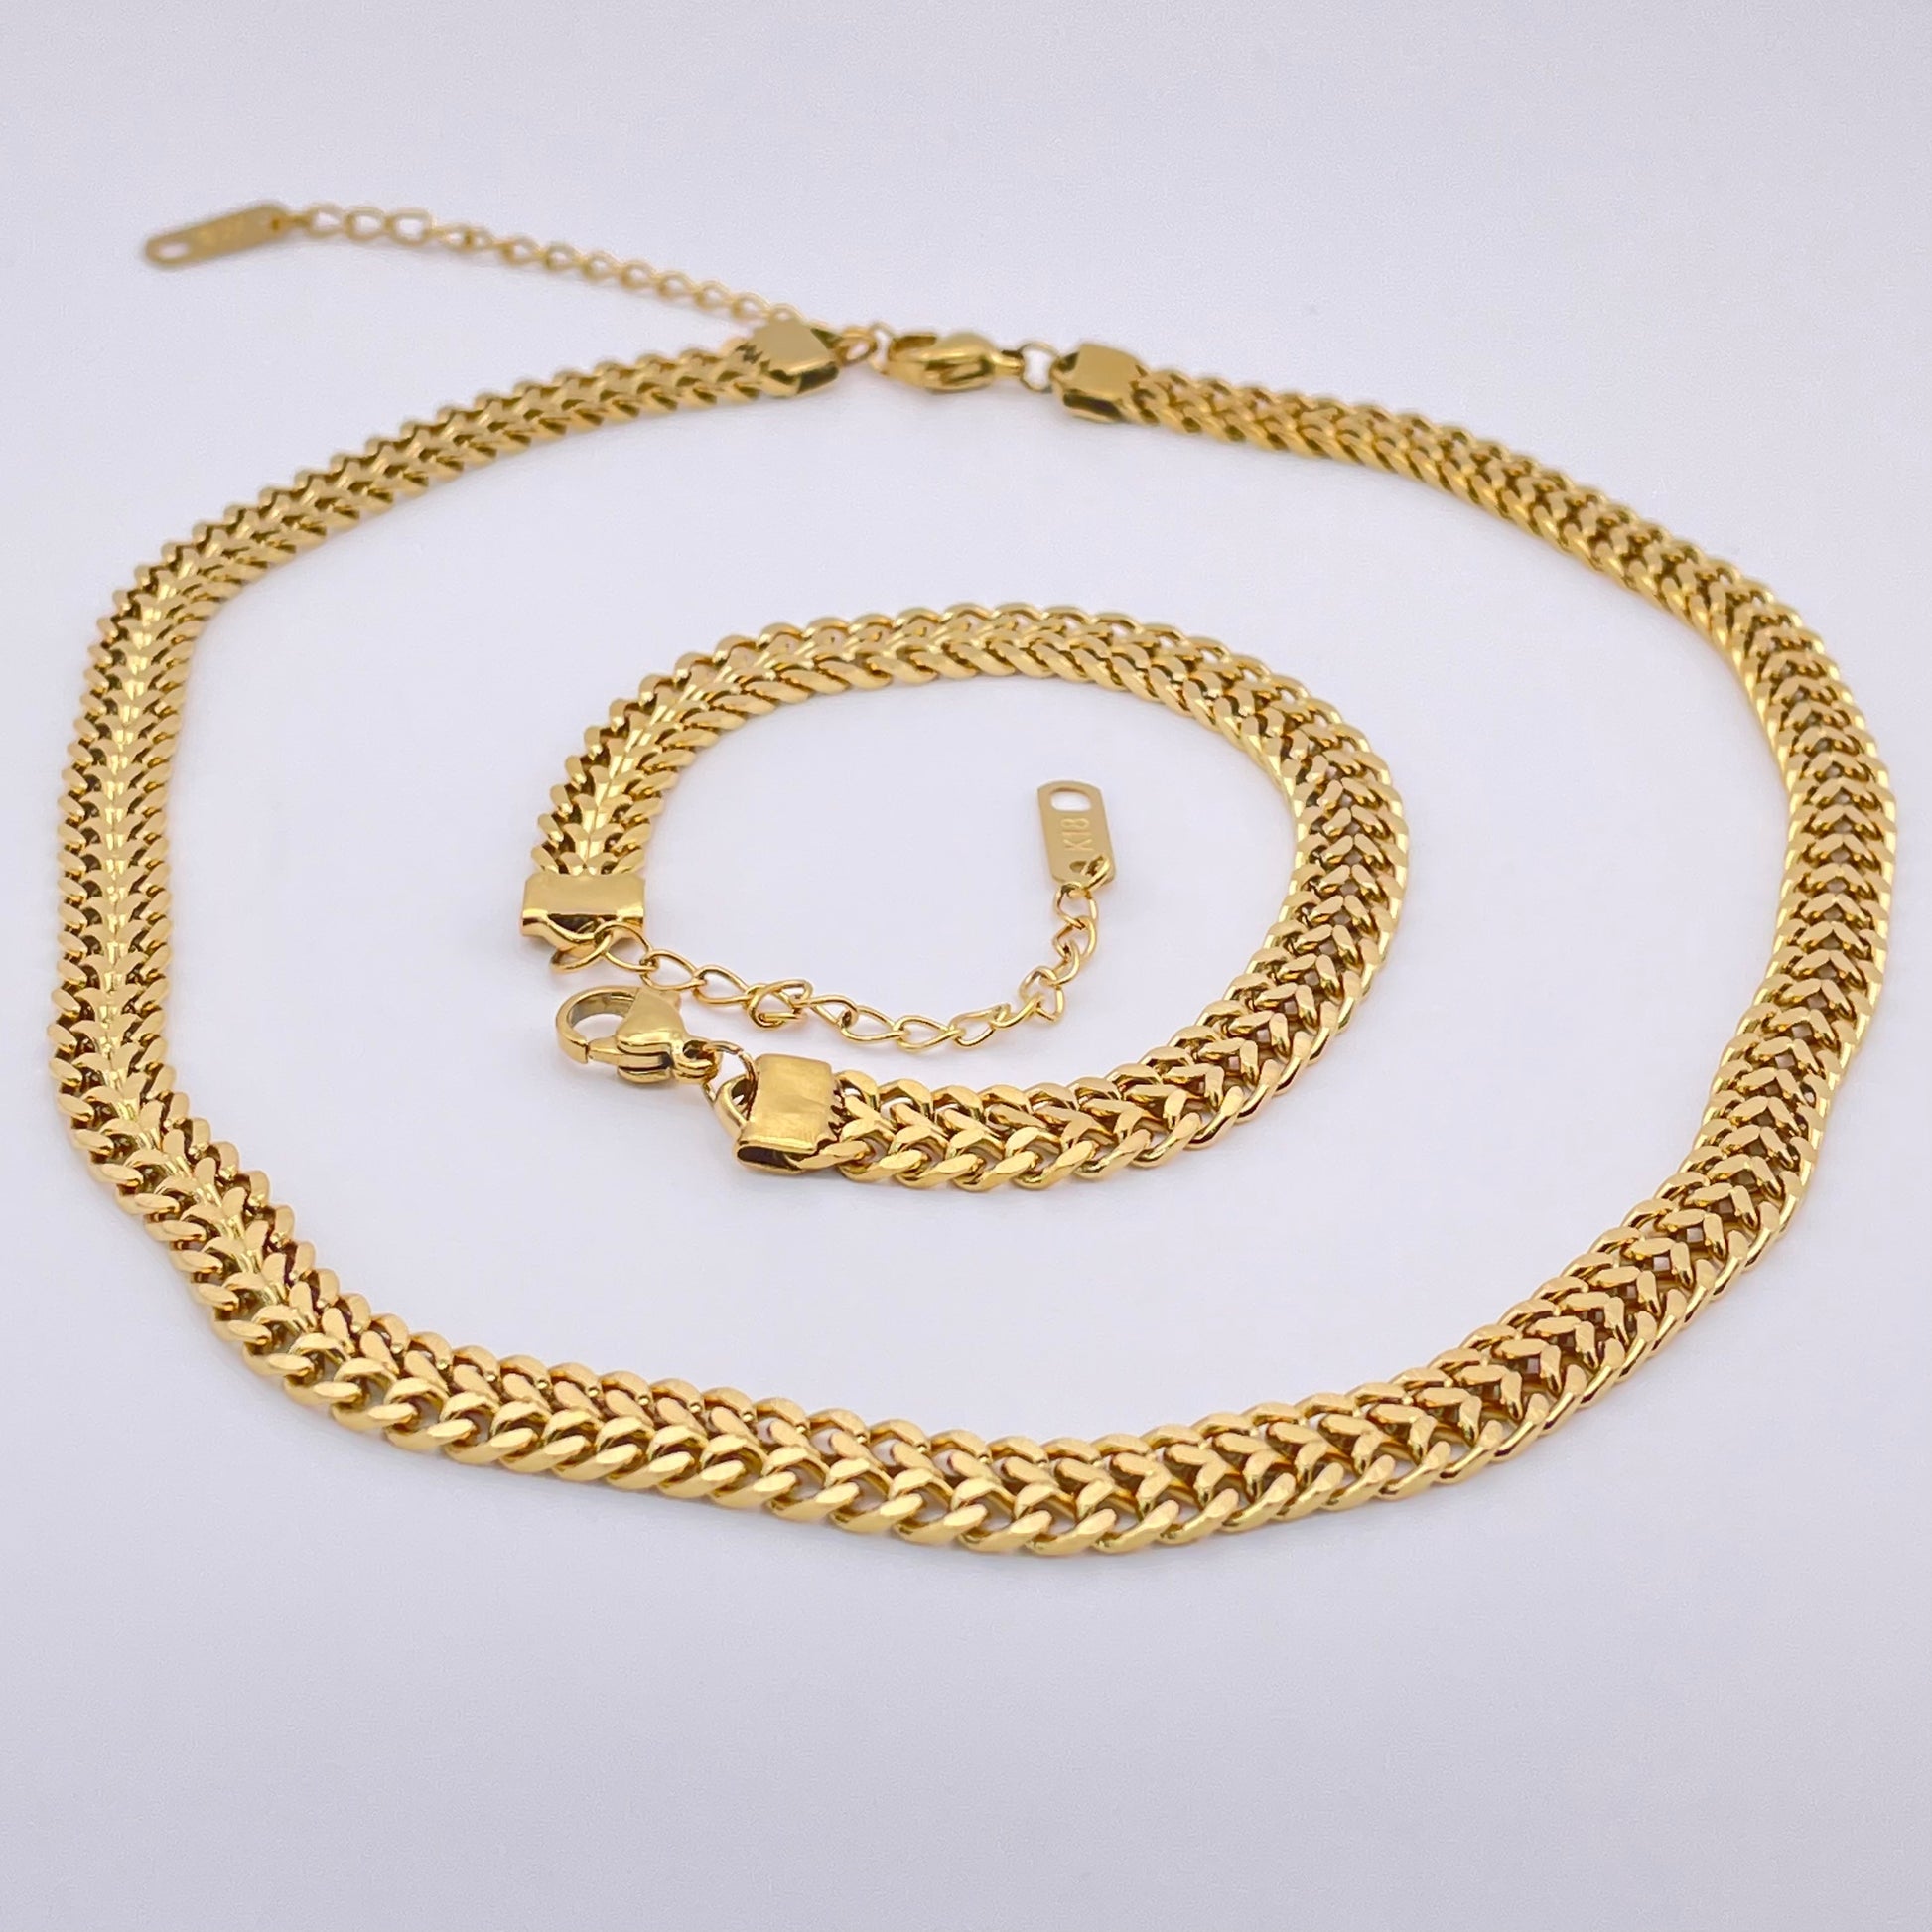 Double Curb Chain Necklace